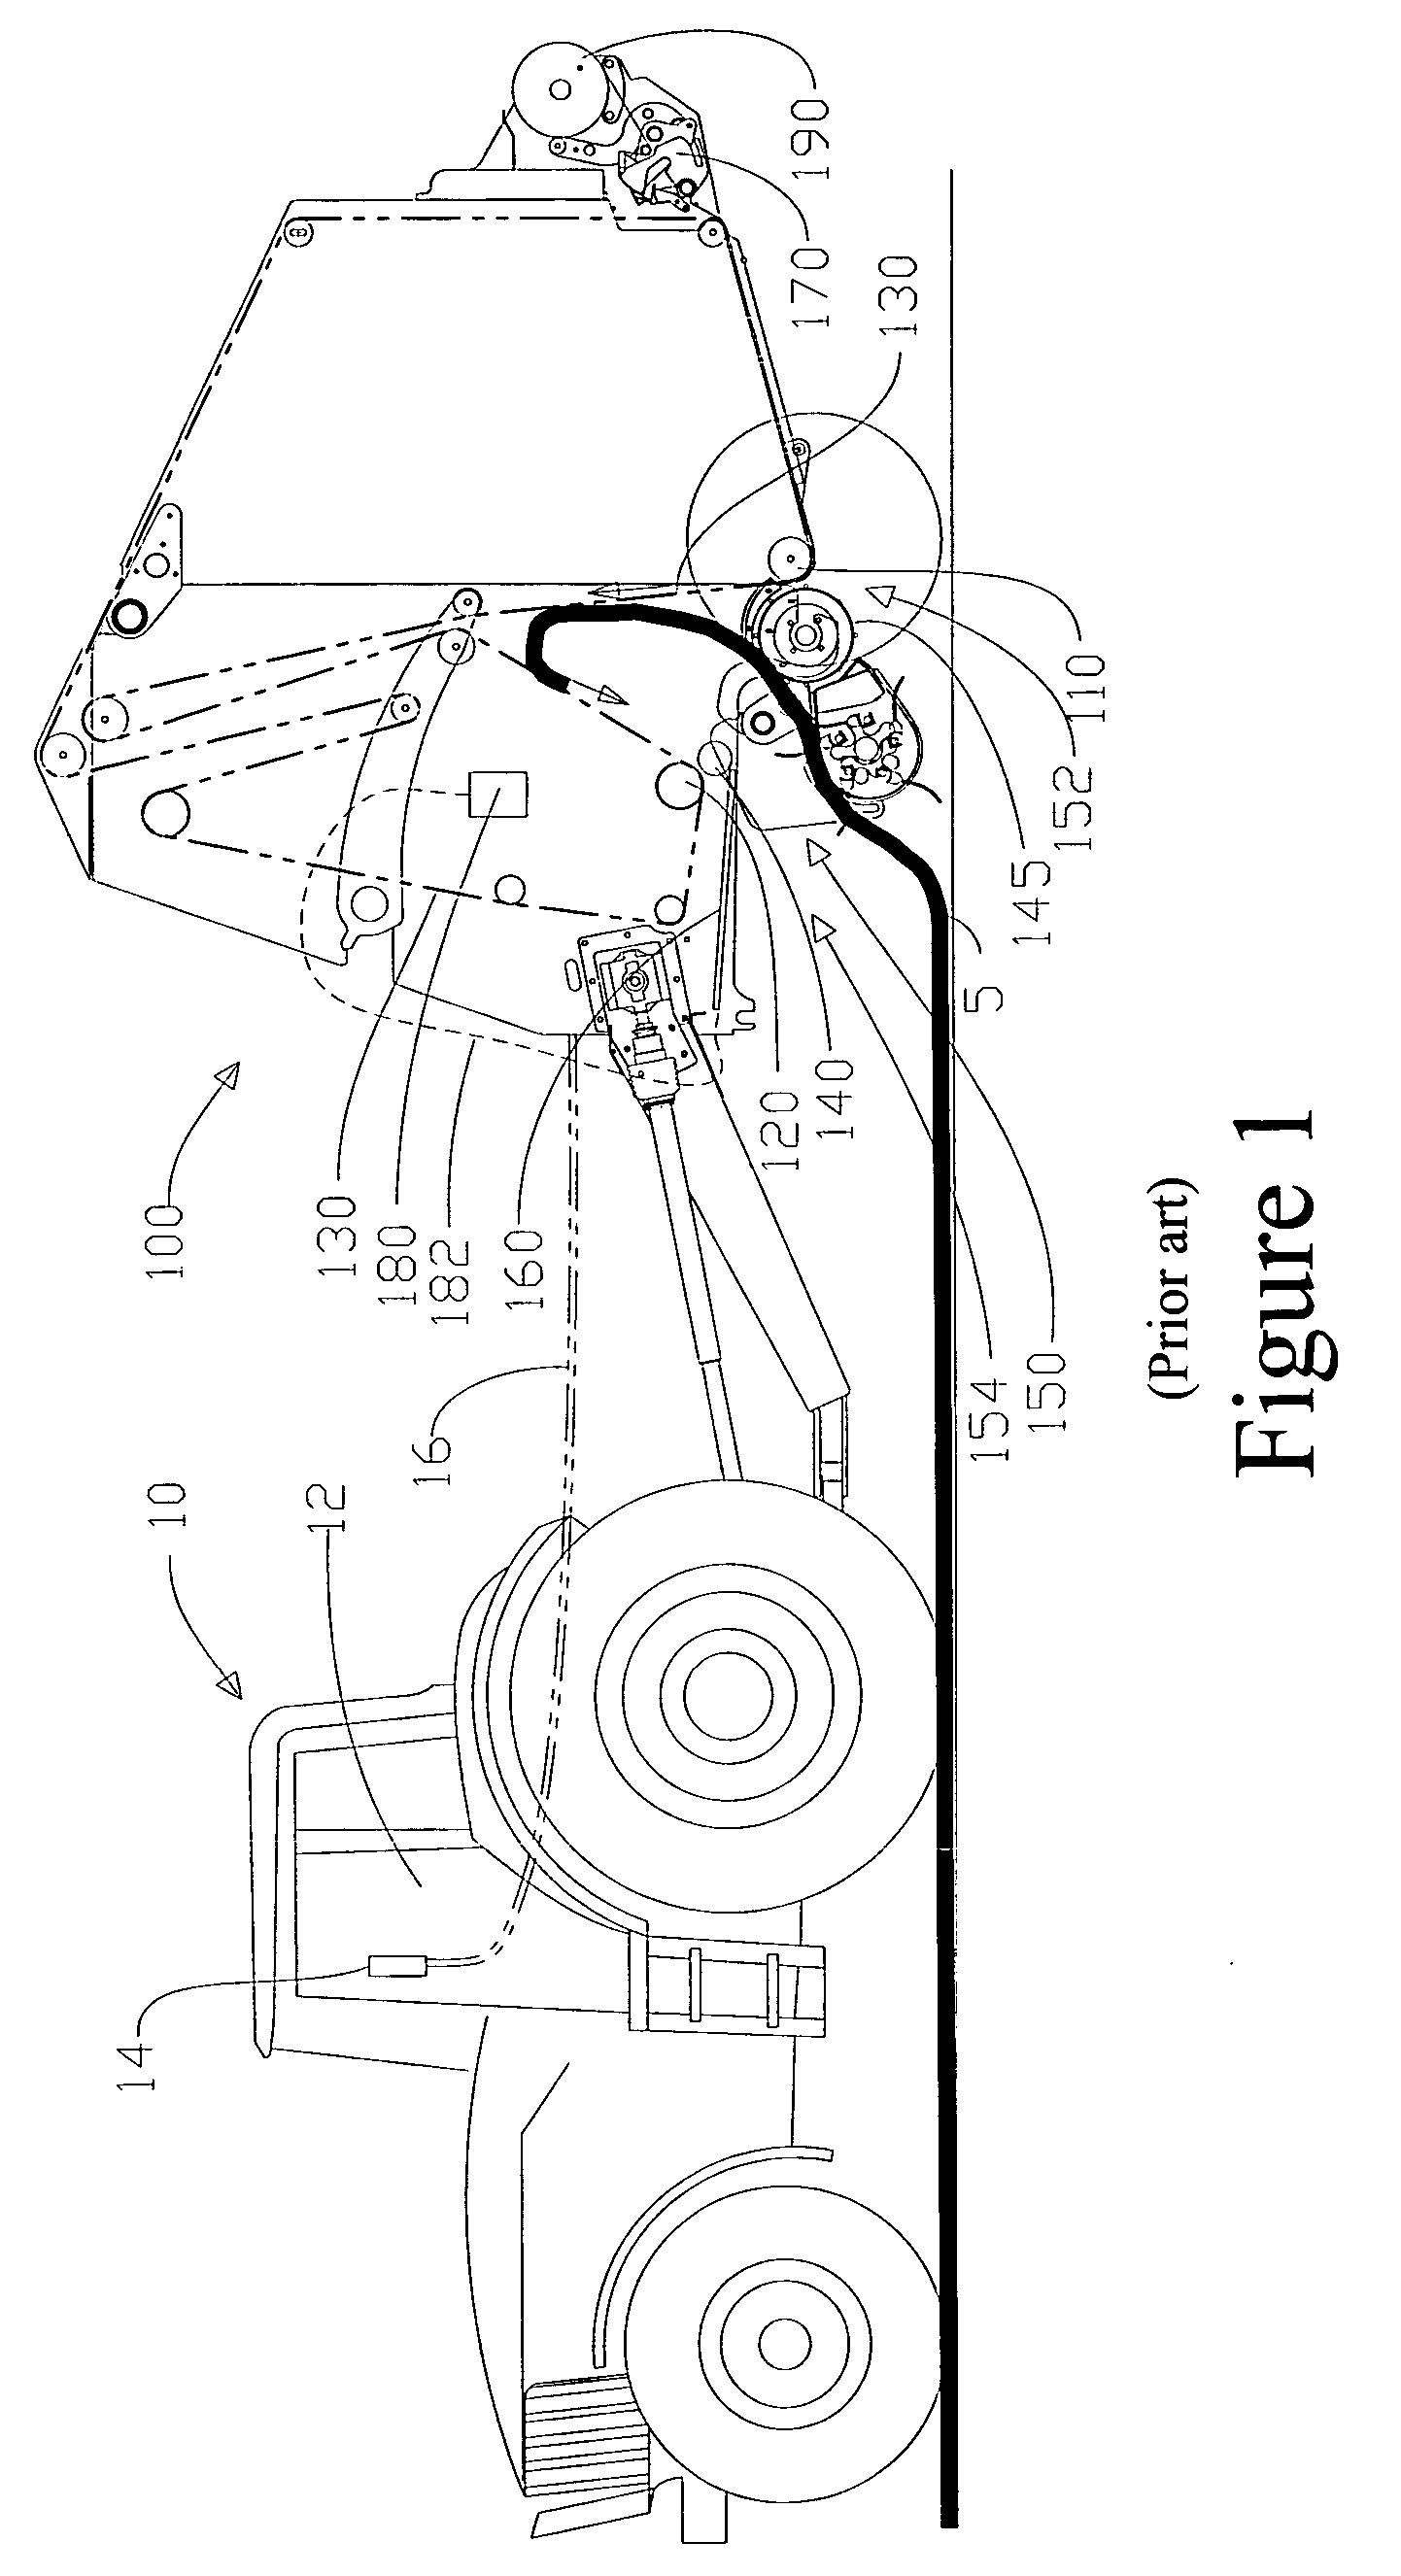 Method of initiating automatic feed of bale wrapping material